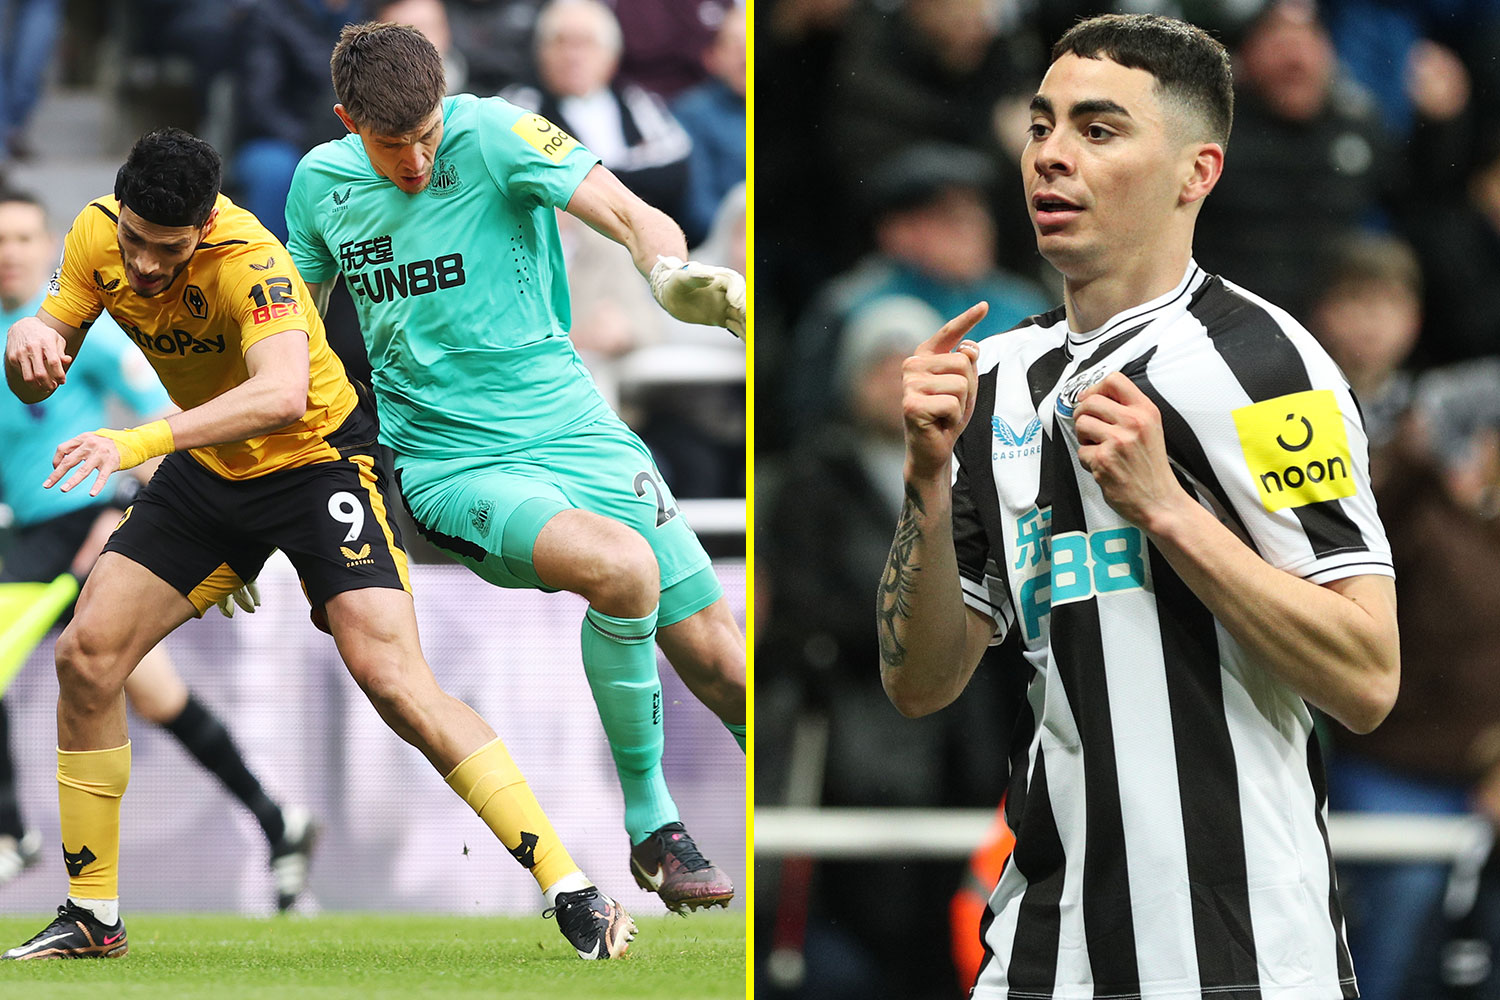 Newcastle get back to winning ways, but Nick Pope 'got away with red card' after collision with Wolves forward Raul Jimenez